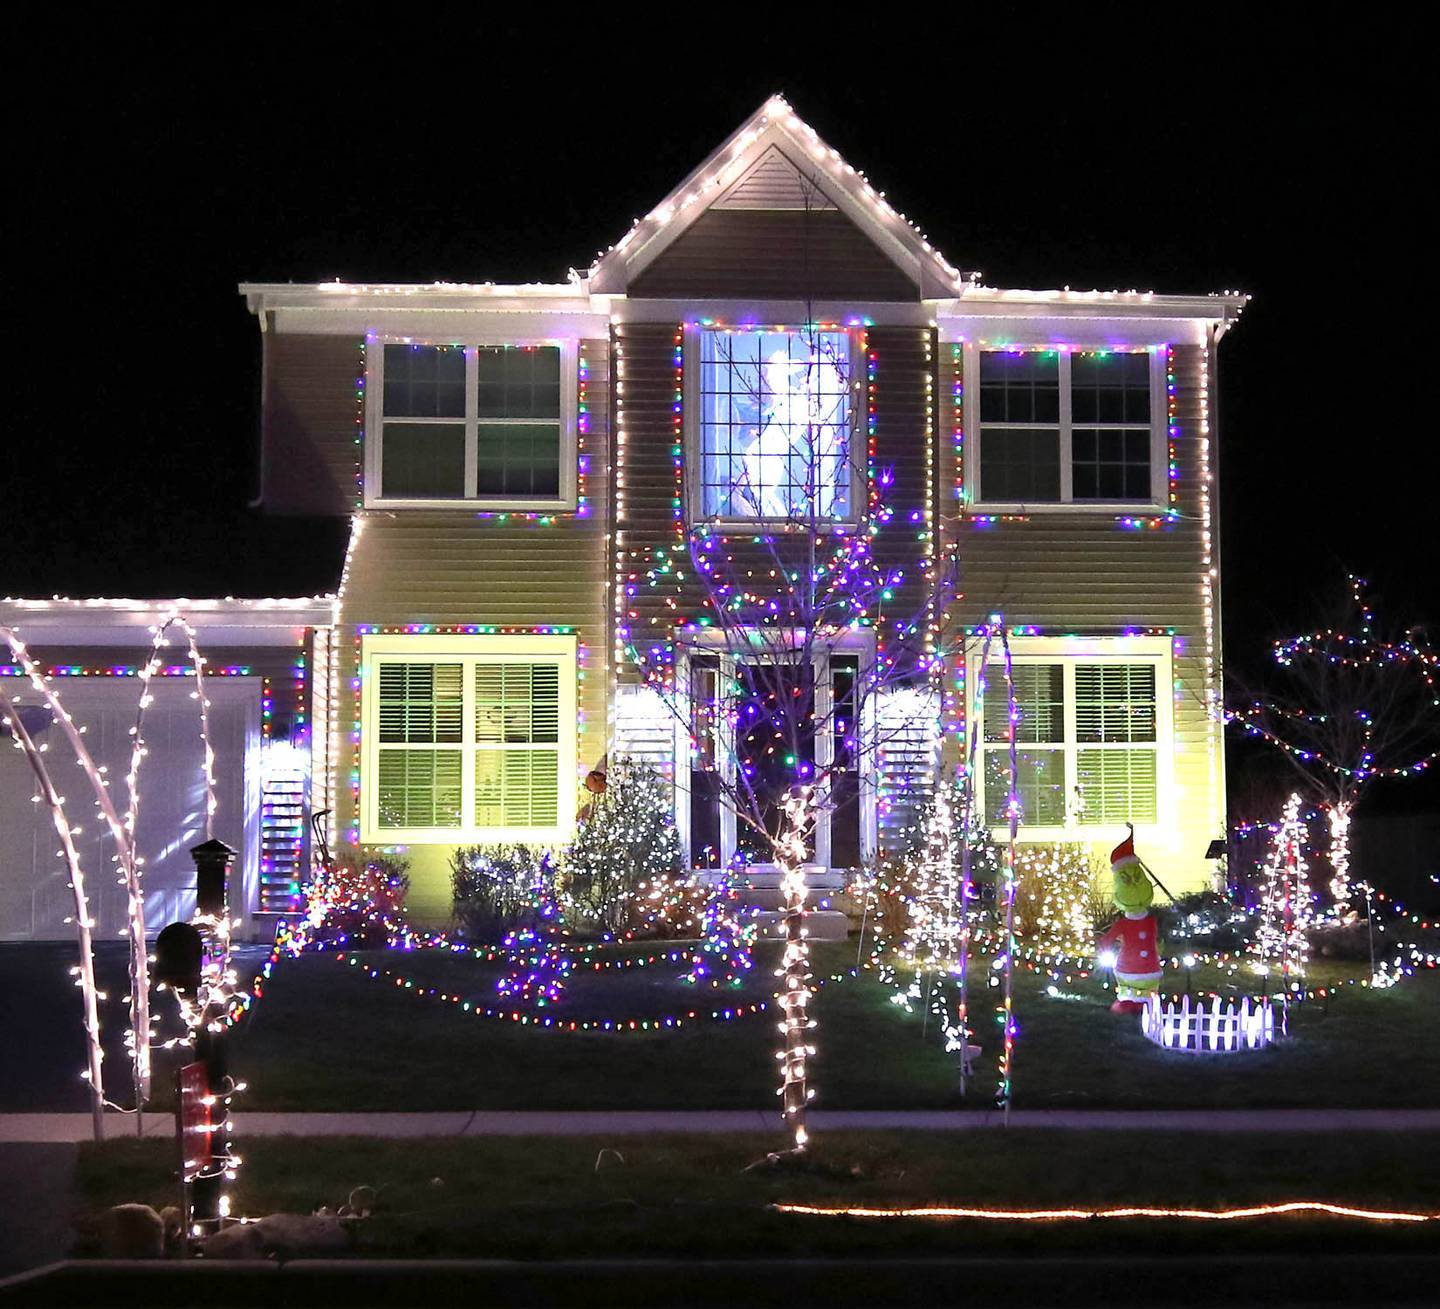 Many homes in DeKalb County were all decked out for the holidays like this one at 341 East Cloverlane Drive in Sycamore which won first place in the Sycamore Park District Holiday House Decorating Contest.